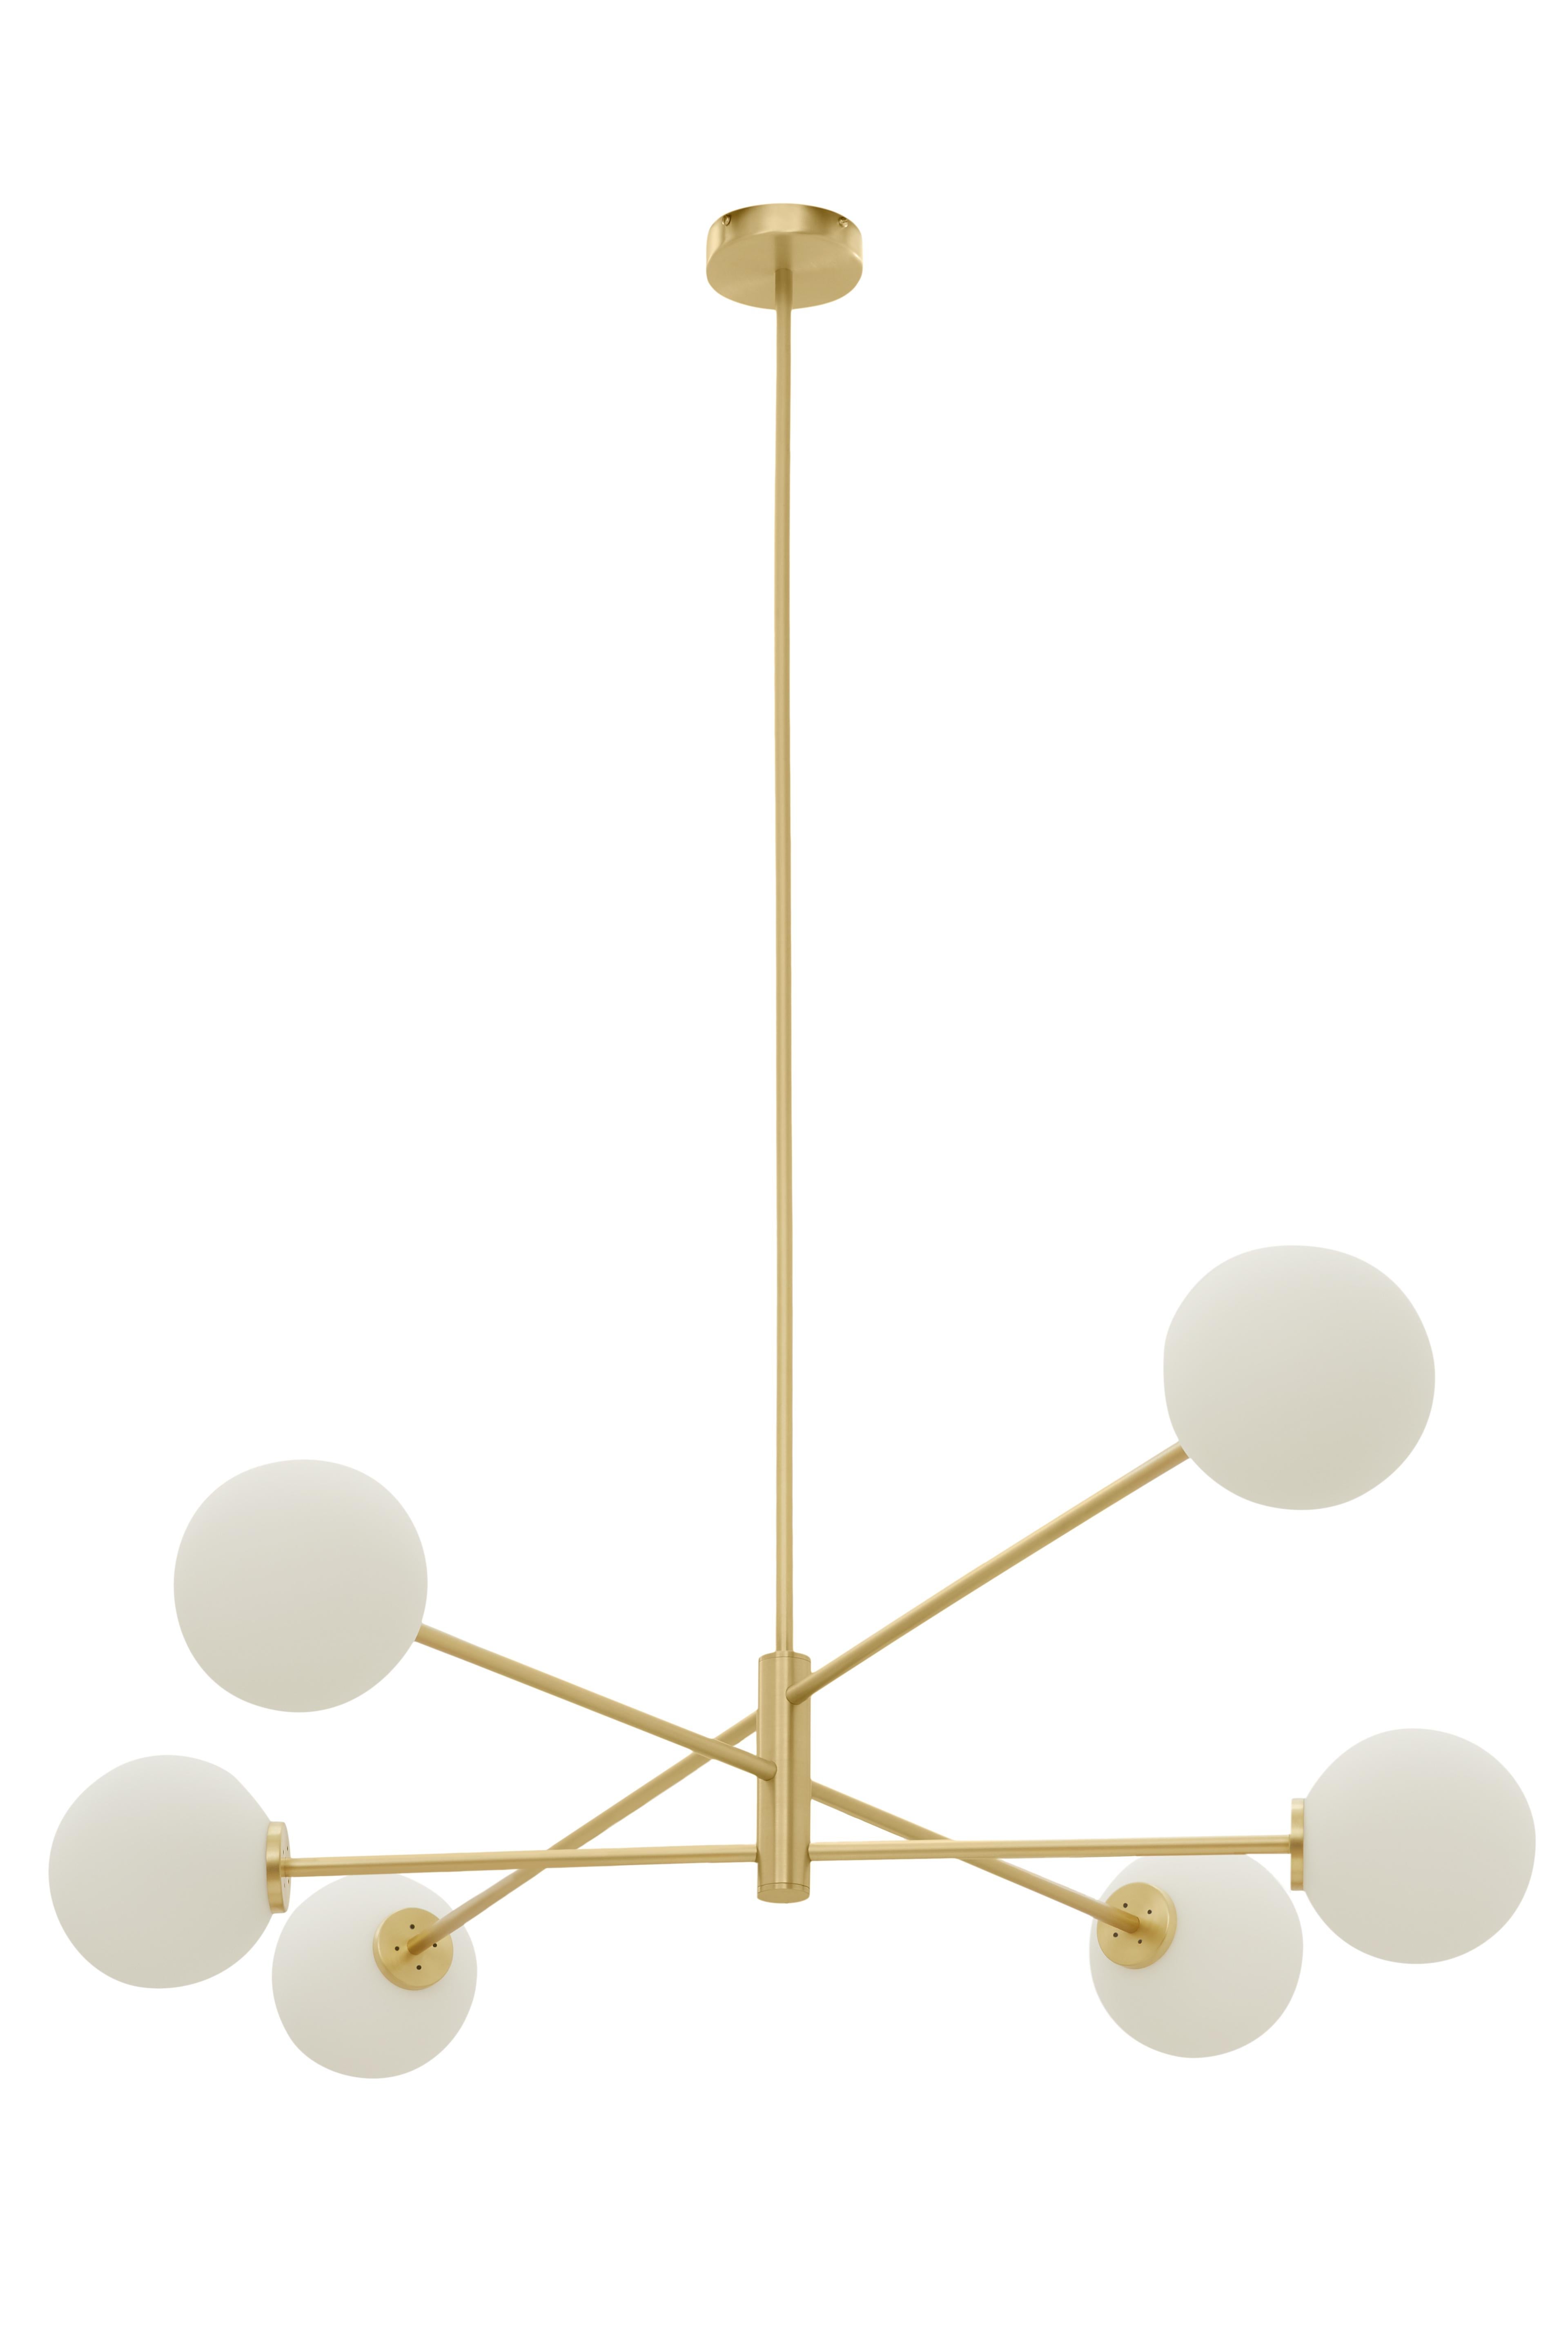 Trevi six pendant by CTO Lighting
Materials: satin brass with matt opal glass shades
Also available in dark bronze with matt opal glass shades

Dimensions: H 25 x W 154 cm 

All our lamps can be wired according to each country. If sold to the USA it